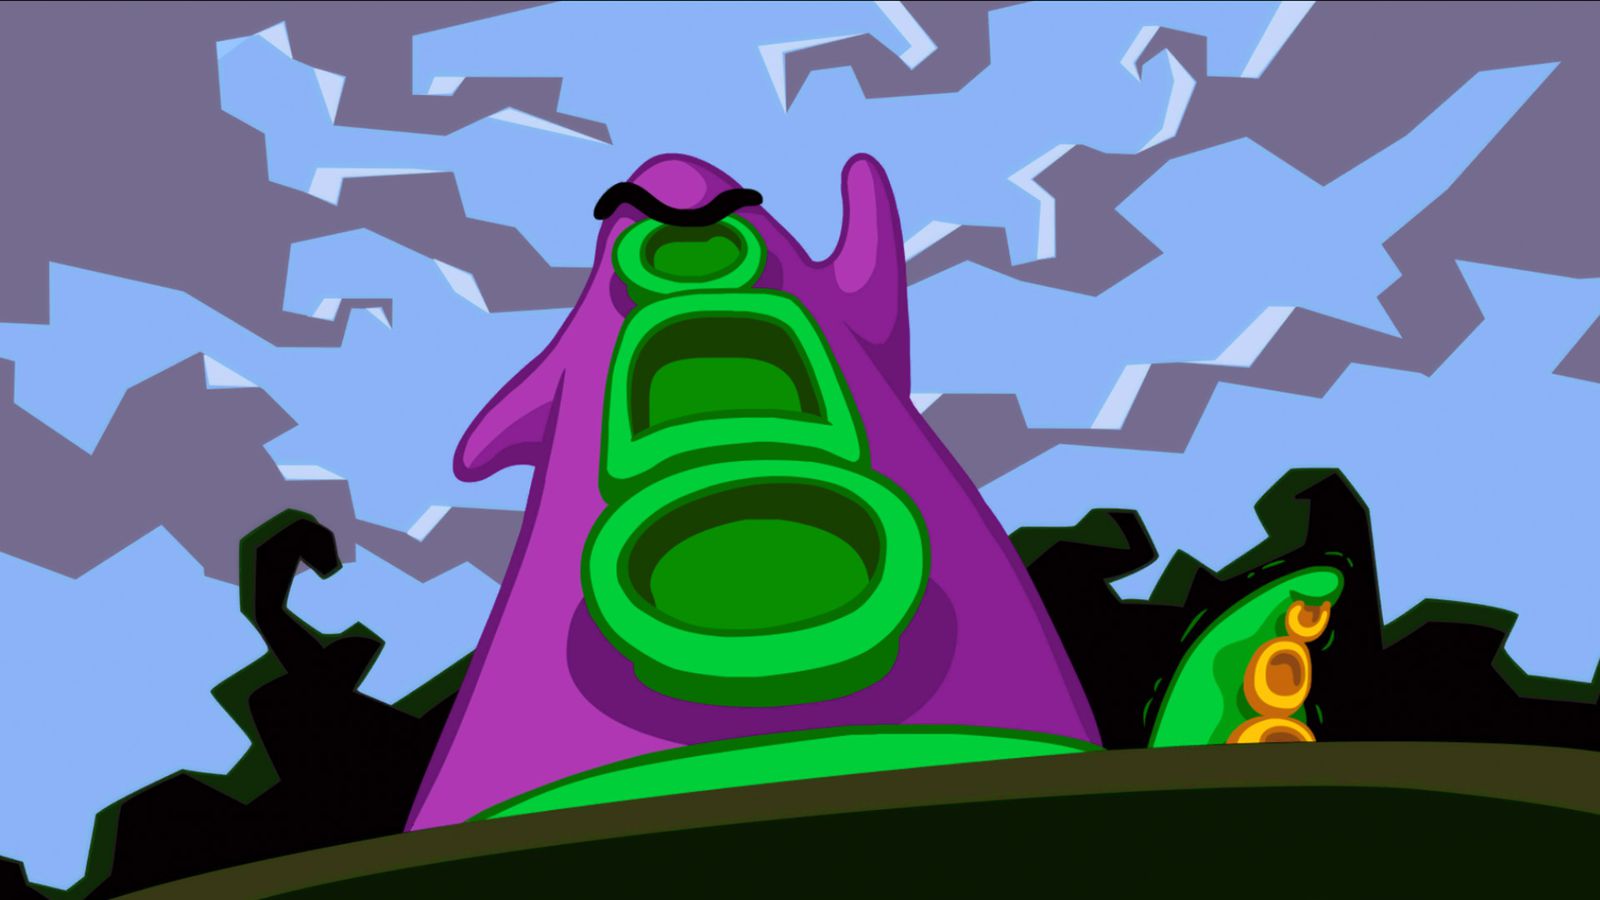 Day of the Tentacle PC game cutscene screenshot with purple tentacle raising fist looking angry and green cowering in the background